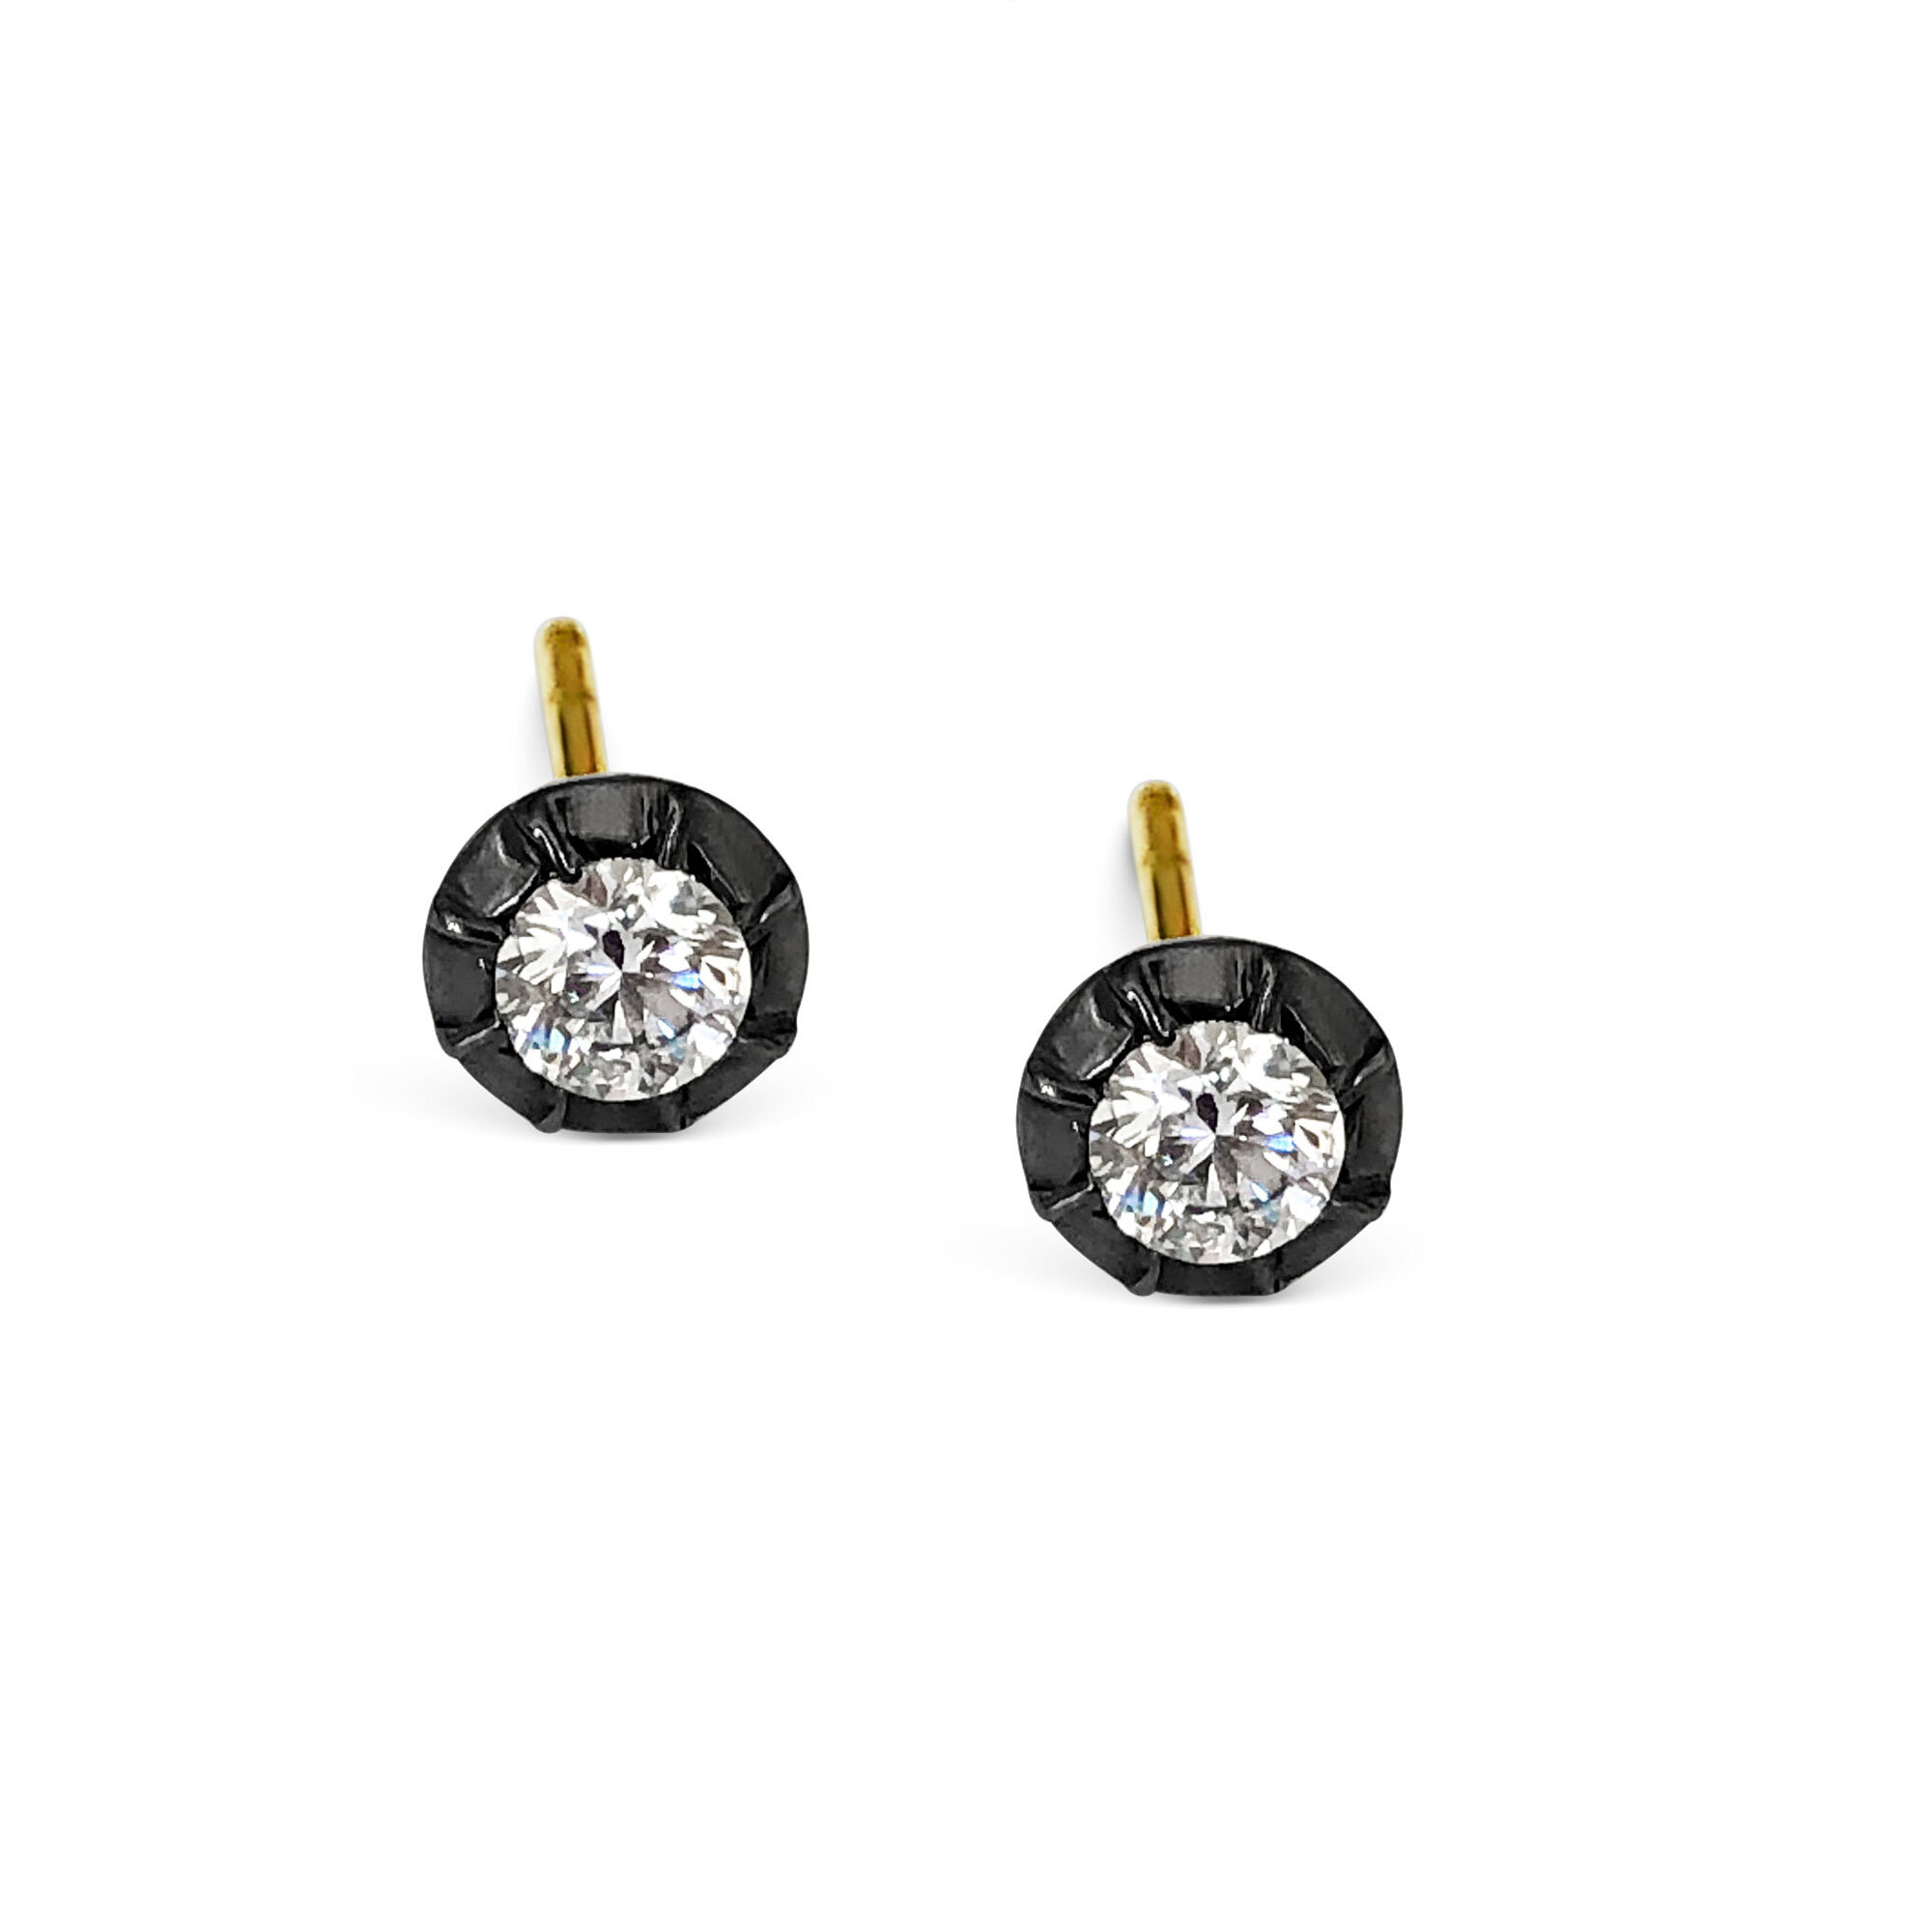 Diamond Stud earrings mounted in black rhodium plated 18ct yellow gold. 